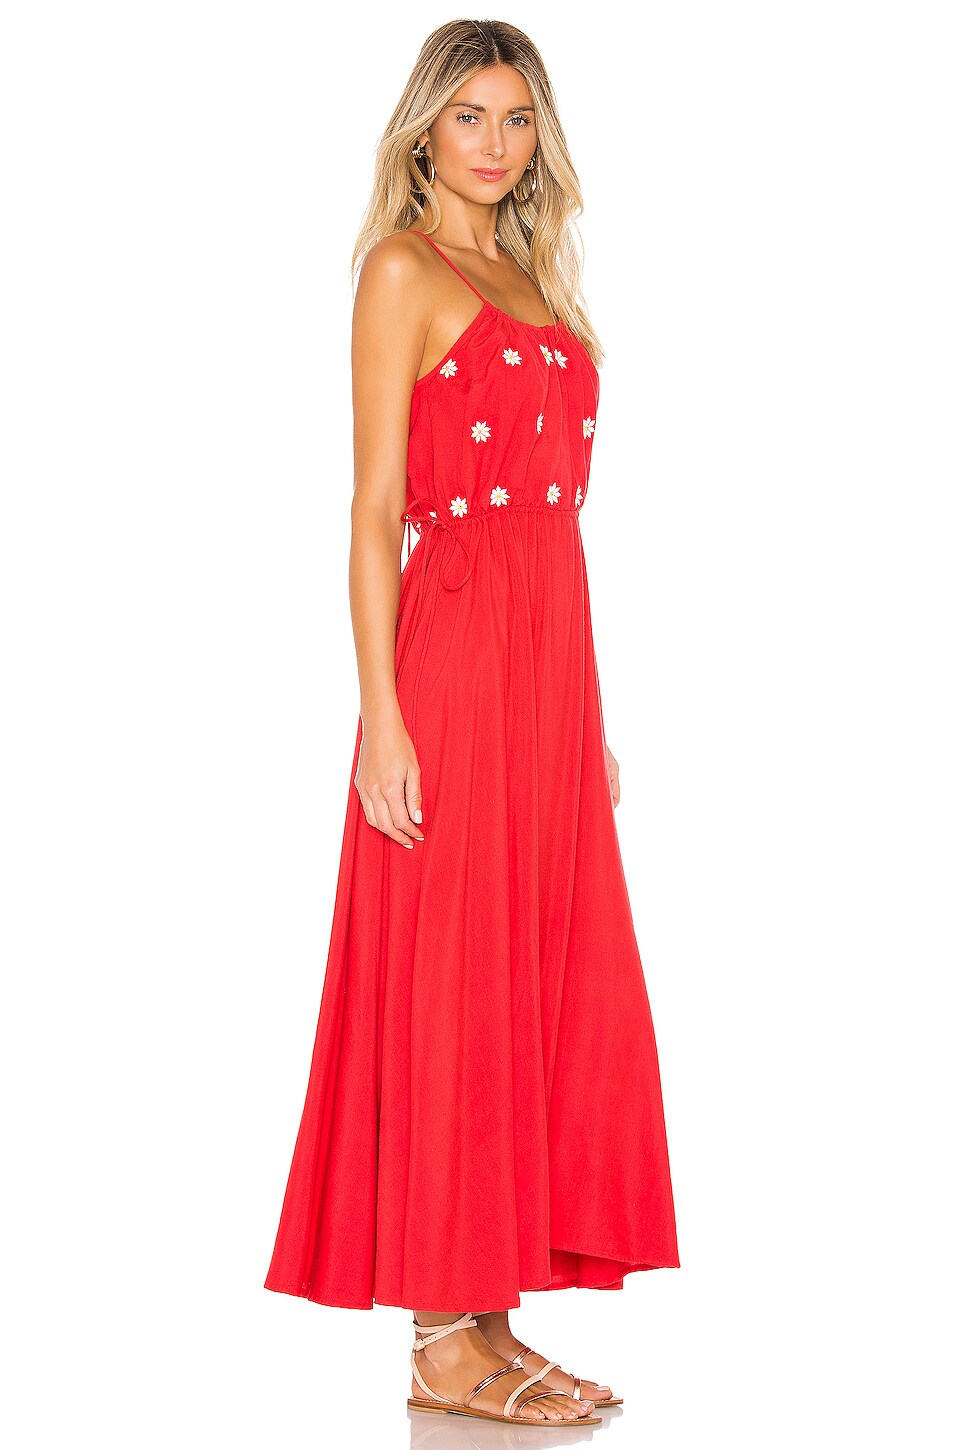 Sundress Robyn Dress in Red & Mini Daisies Embroideries | REVOLVE